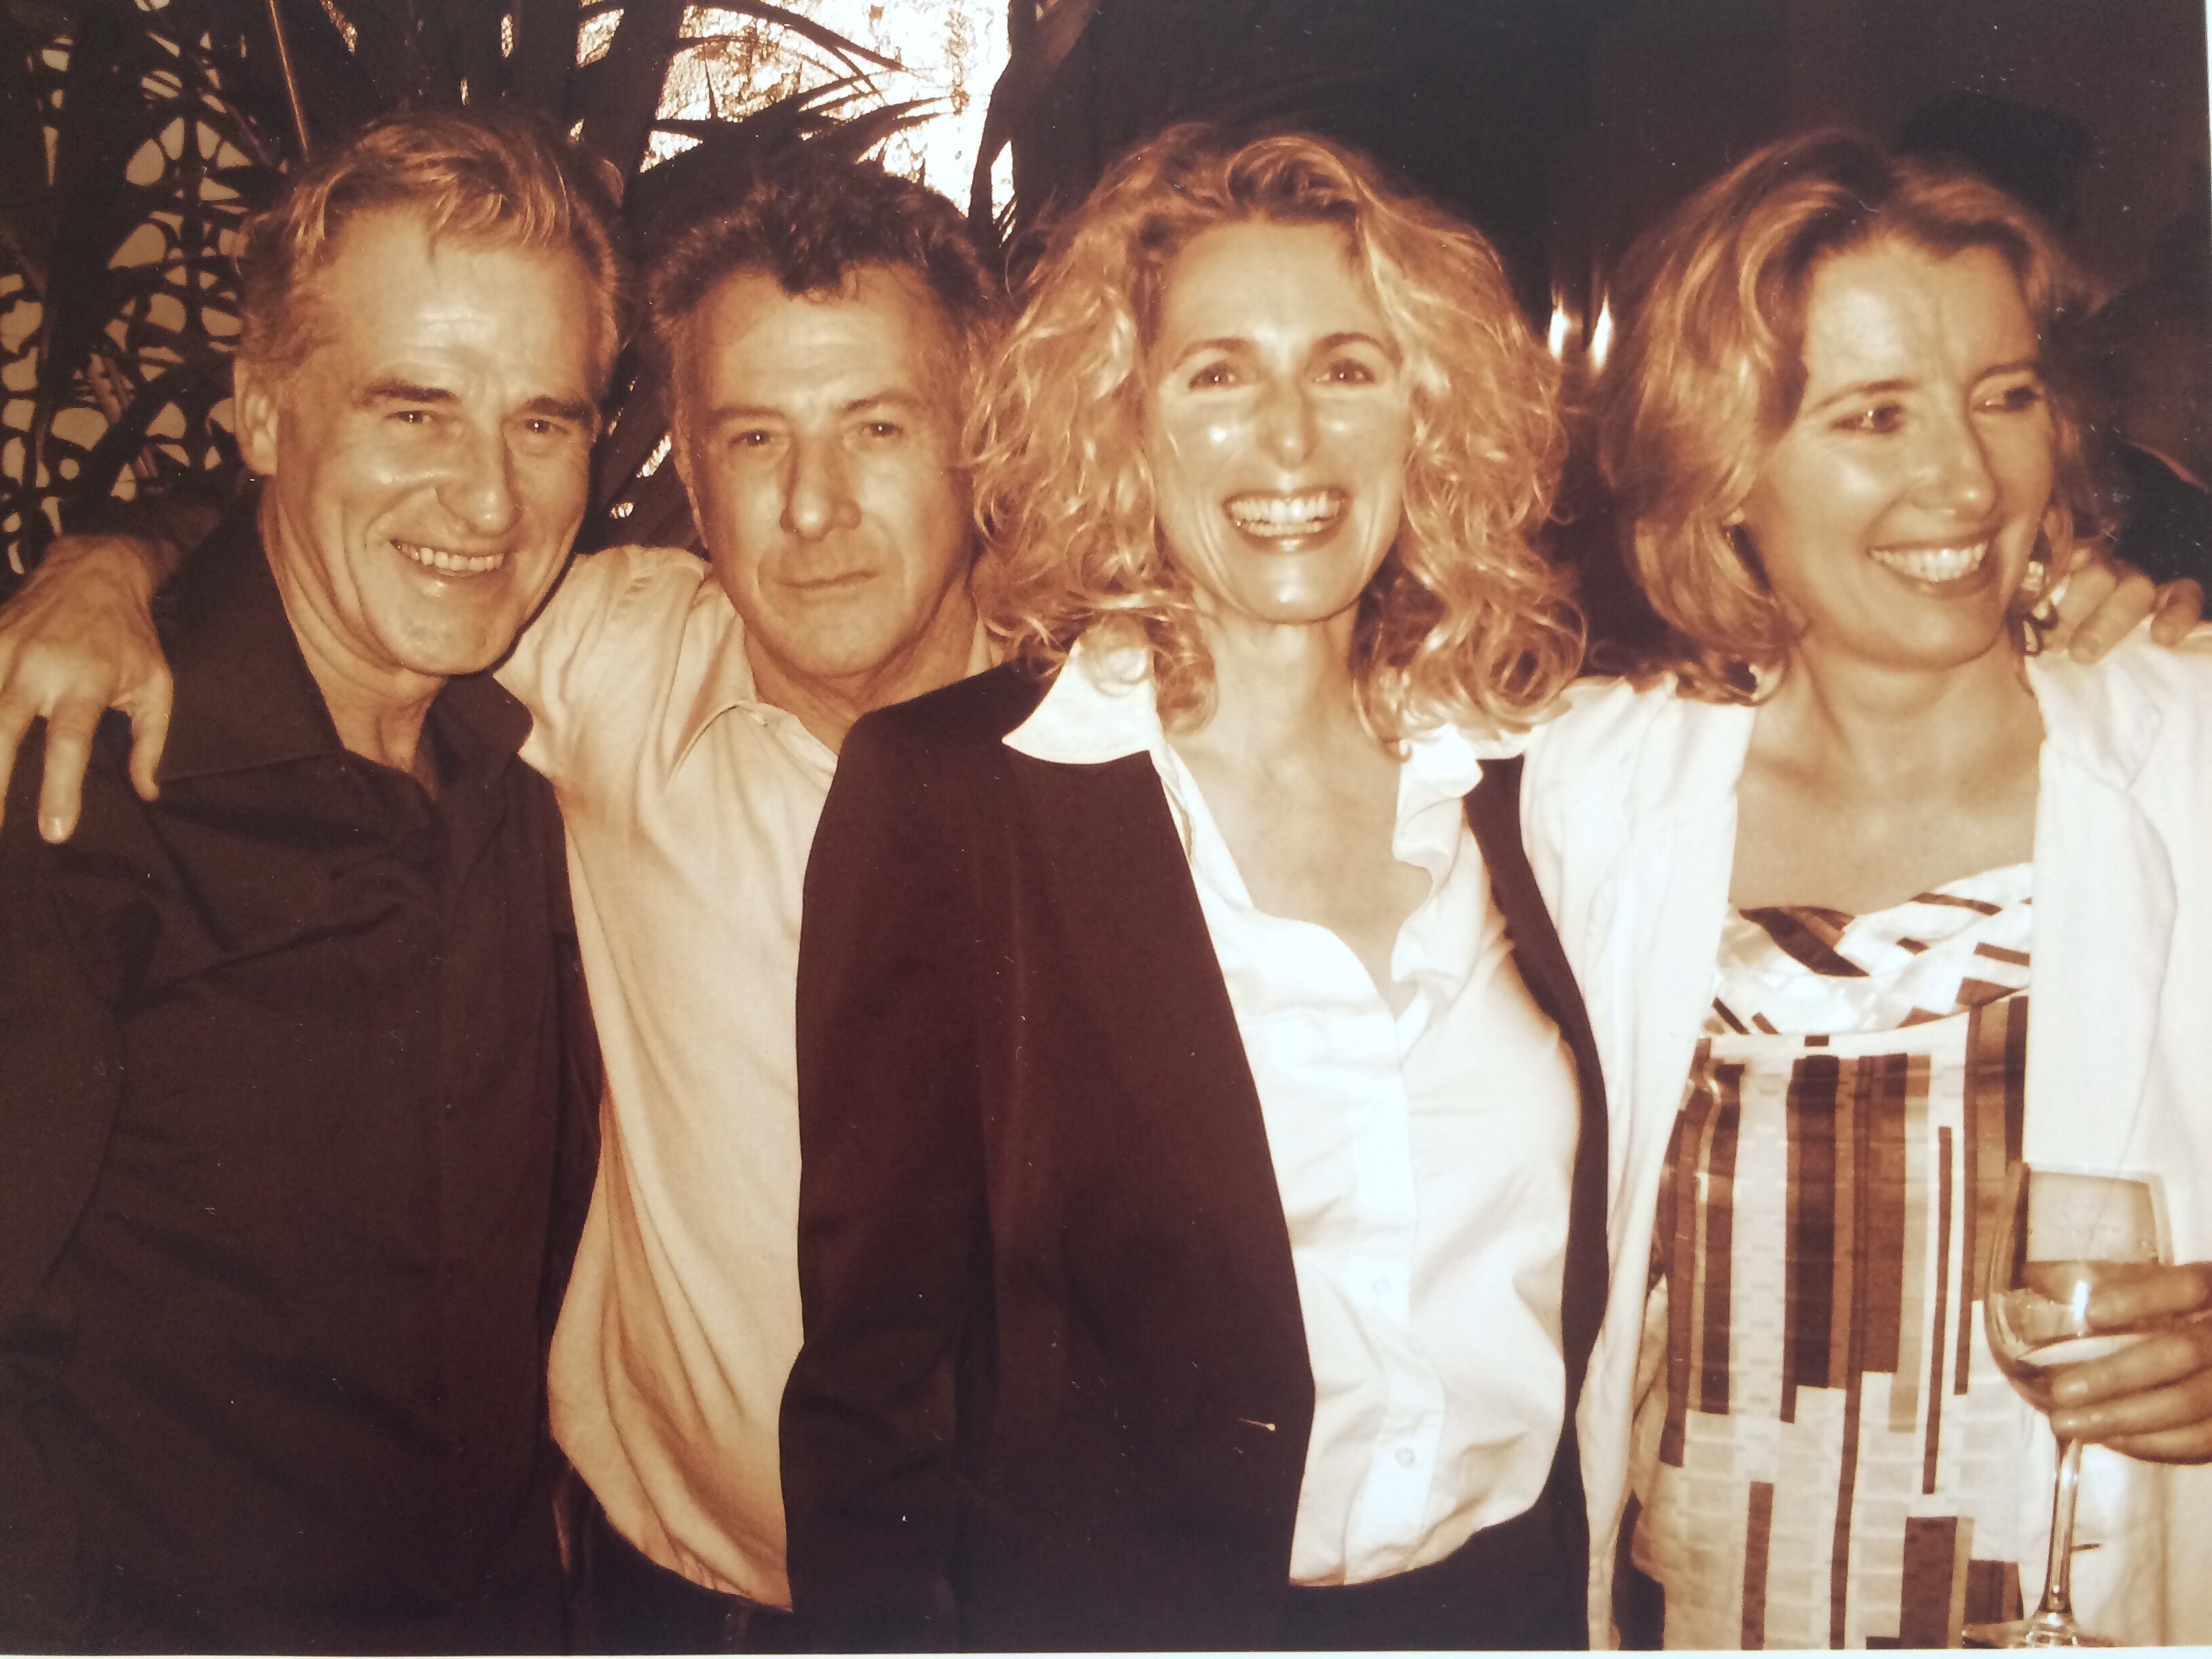 With Dustin Hoffman, Emma Thompson and husband actor Tim Ahern.